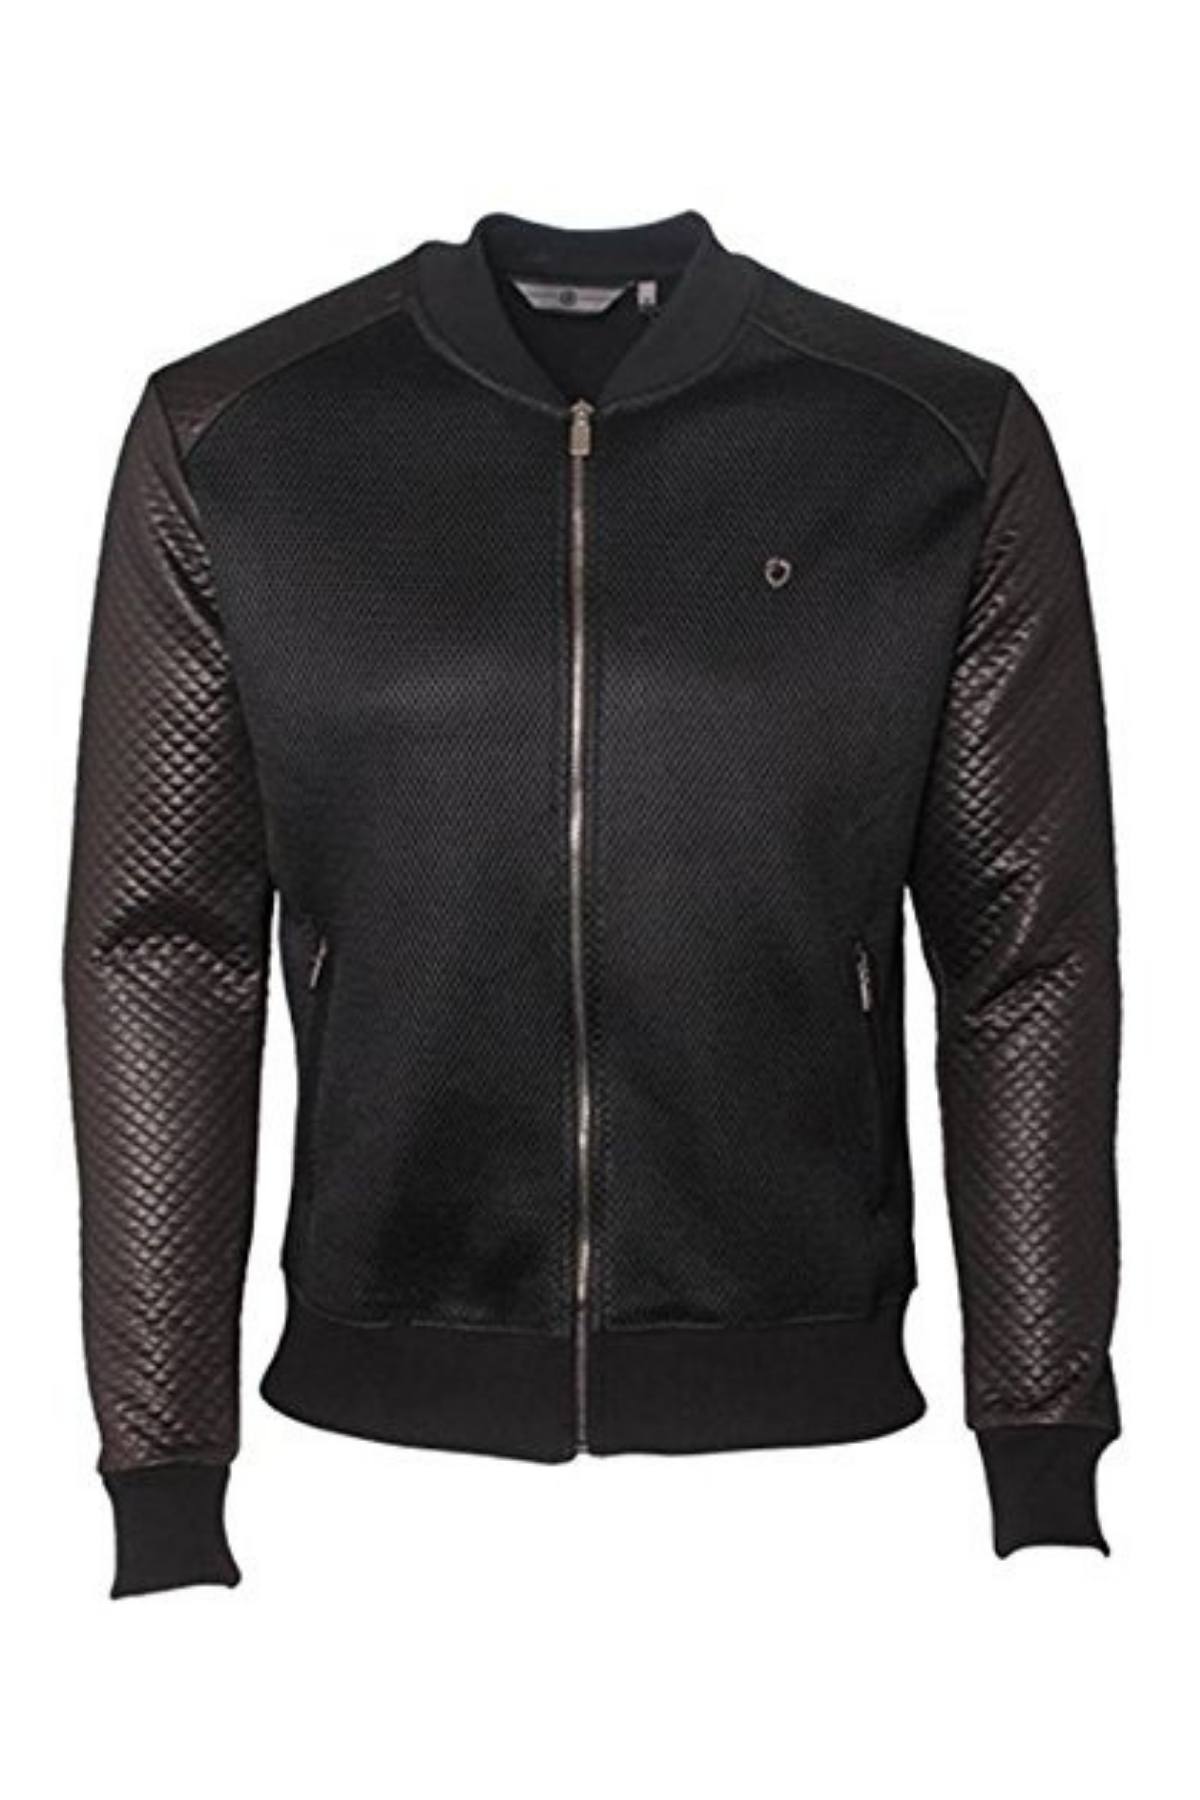 ETO Jeans Black Quilted Jacket